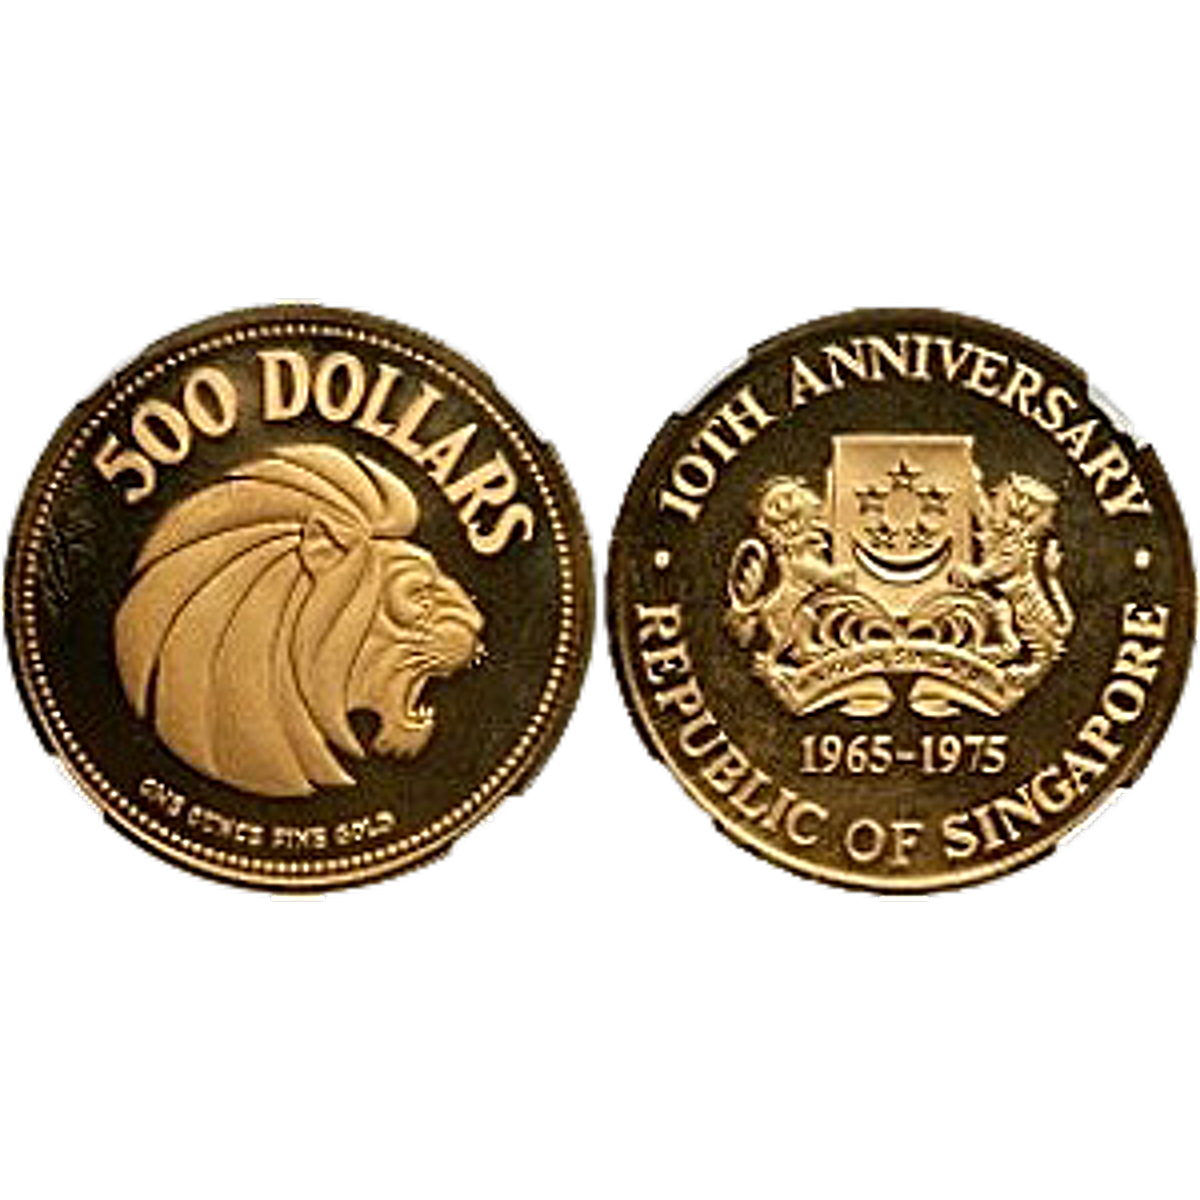 Singapore Mint 10th Anniversary of the Republic of Singapore 1965-1975 -  Circulated in Good Condition - 1 oz gold